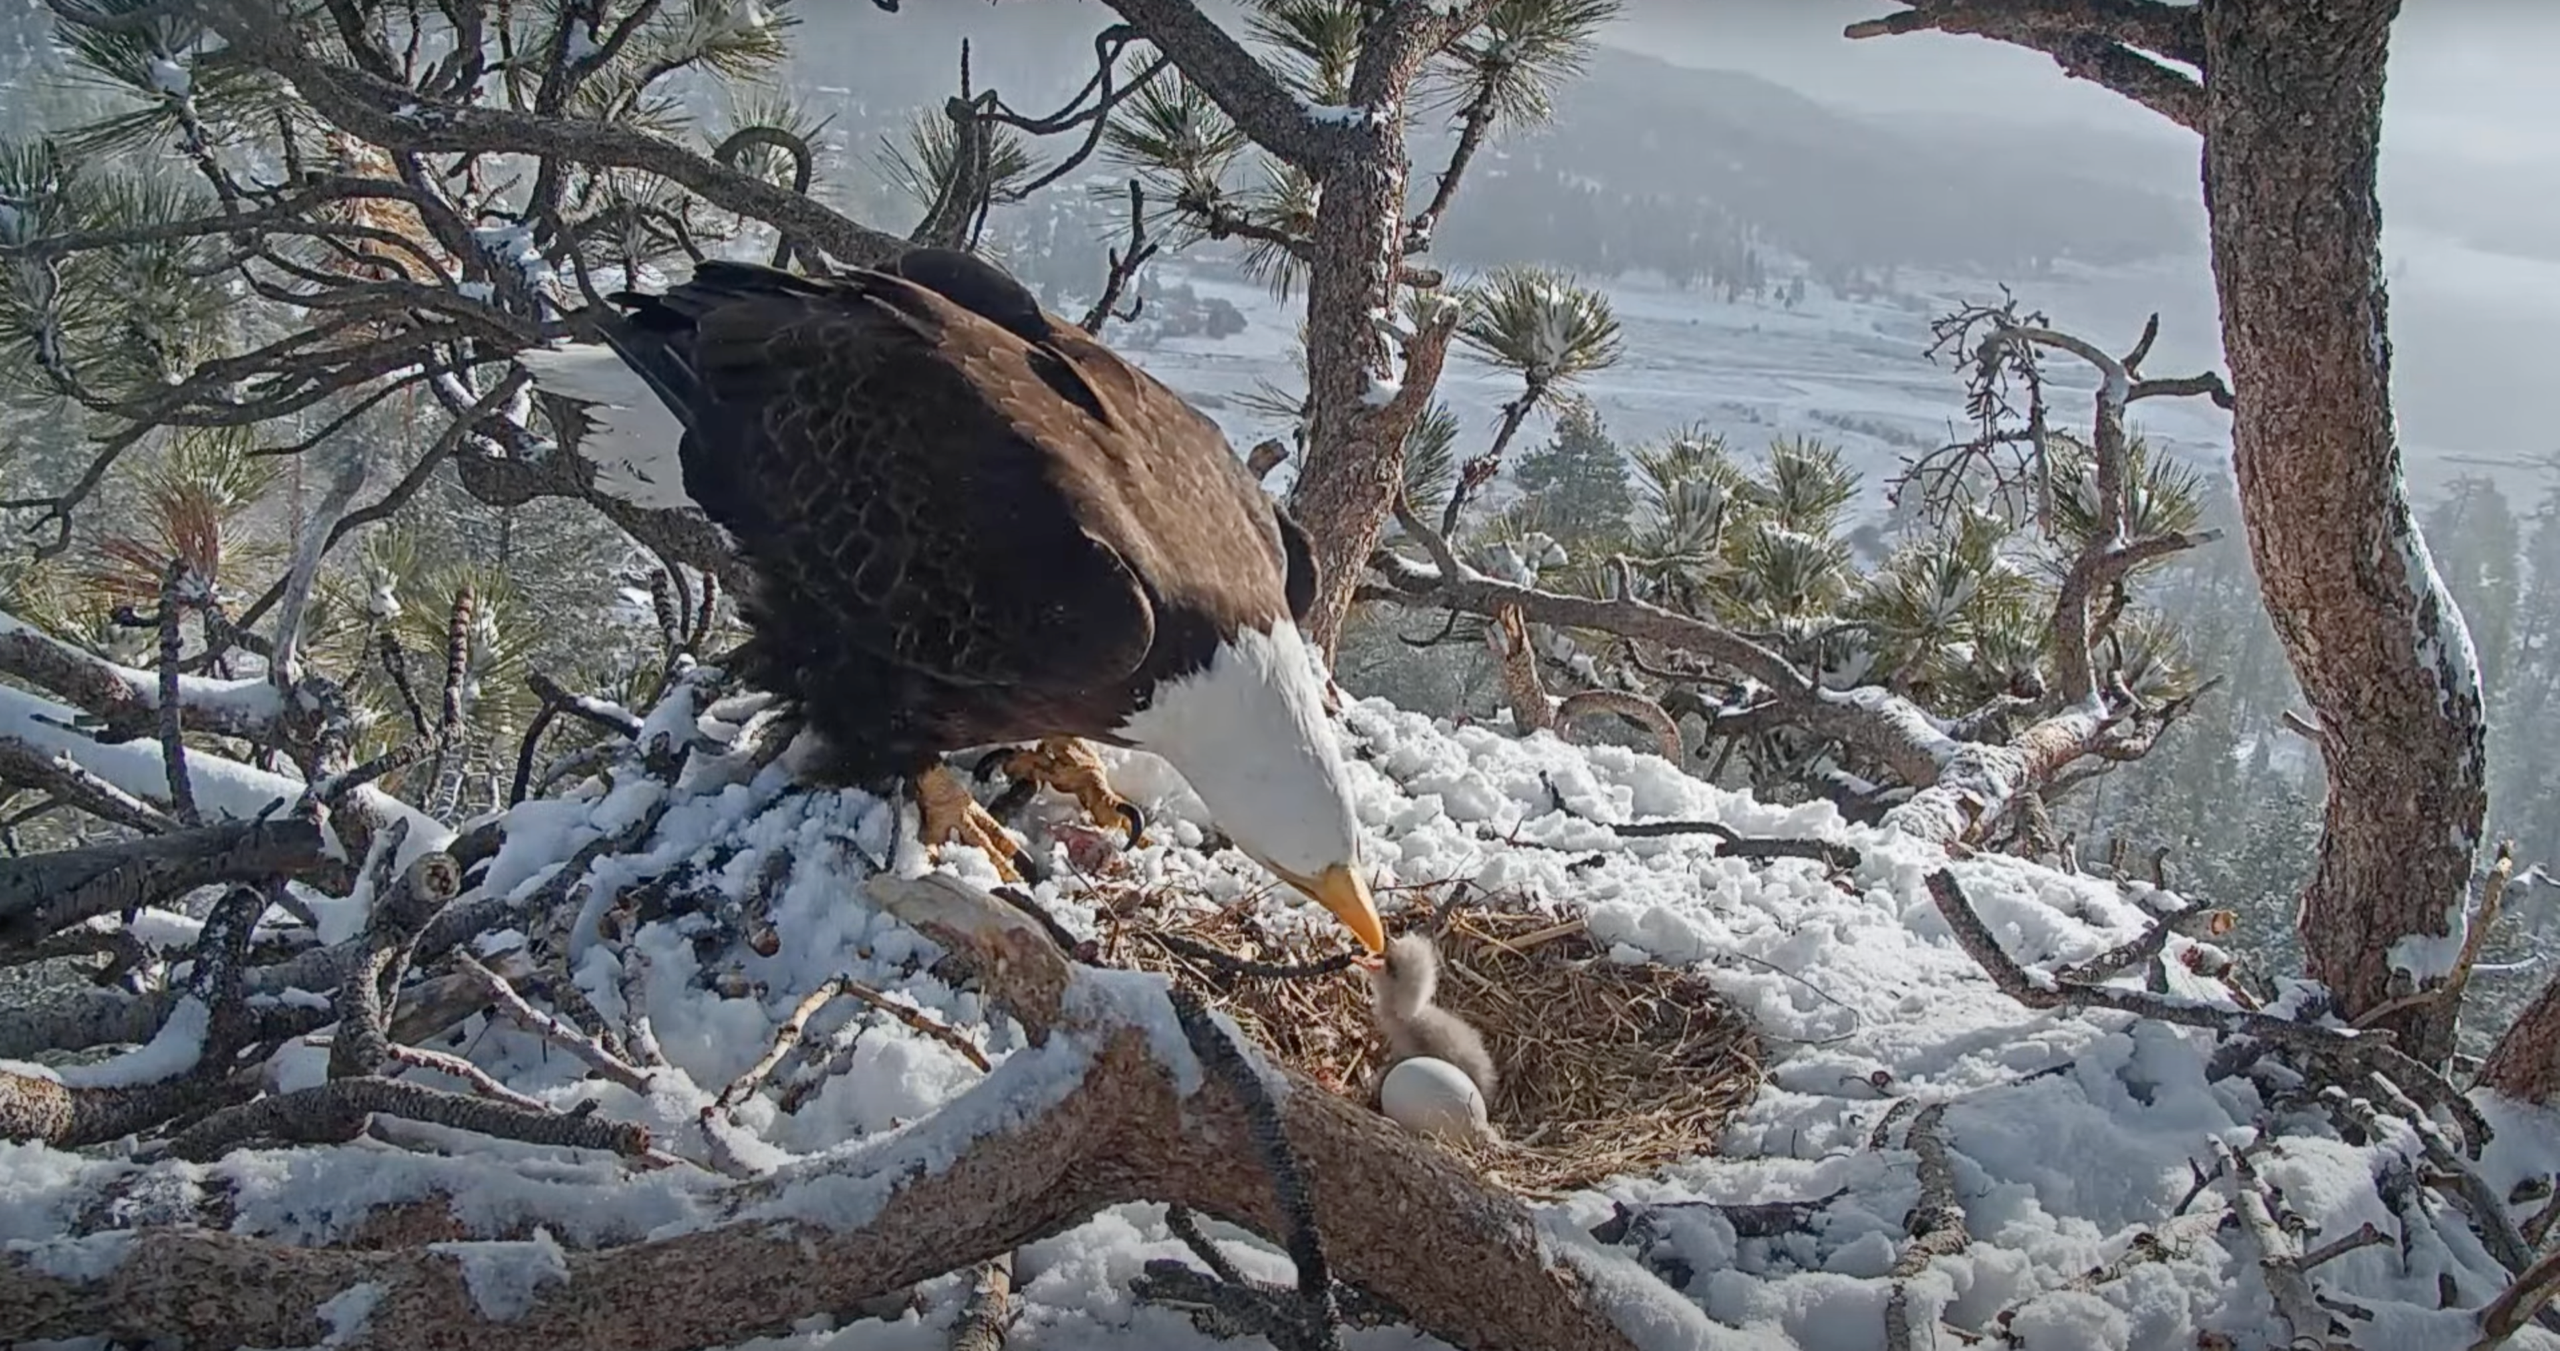 Big Bear Eagles with new eaglet in the snow